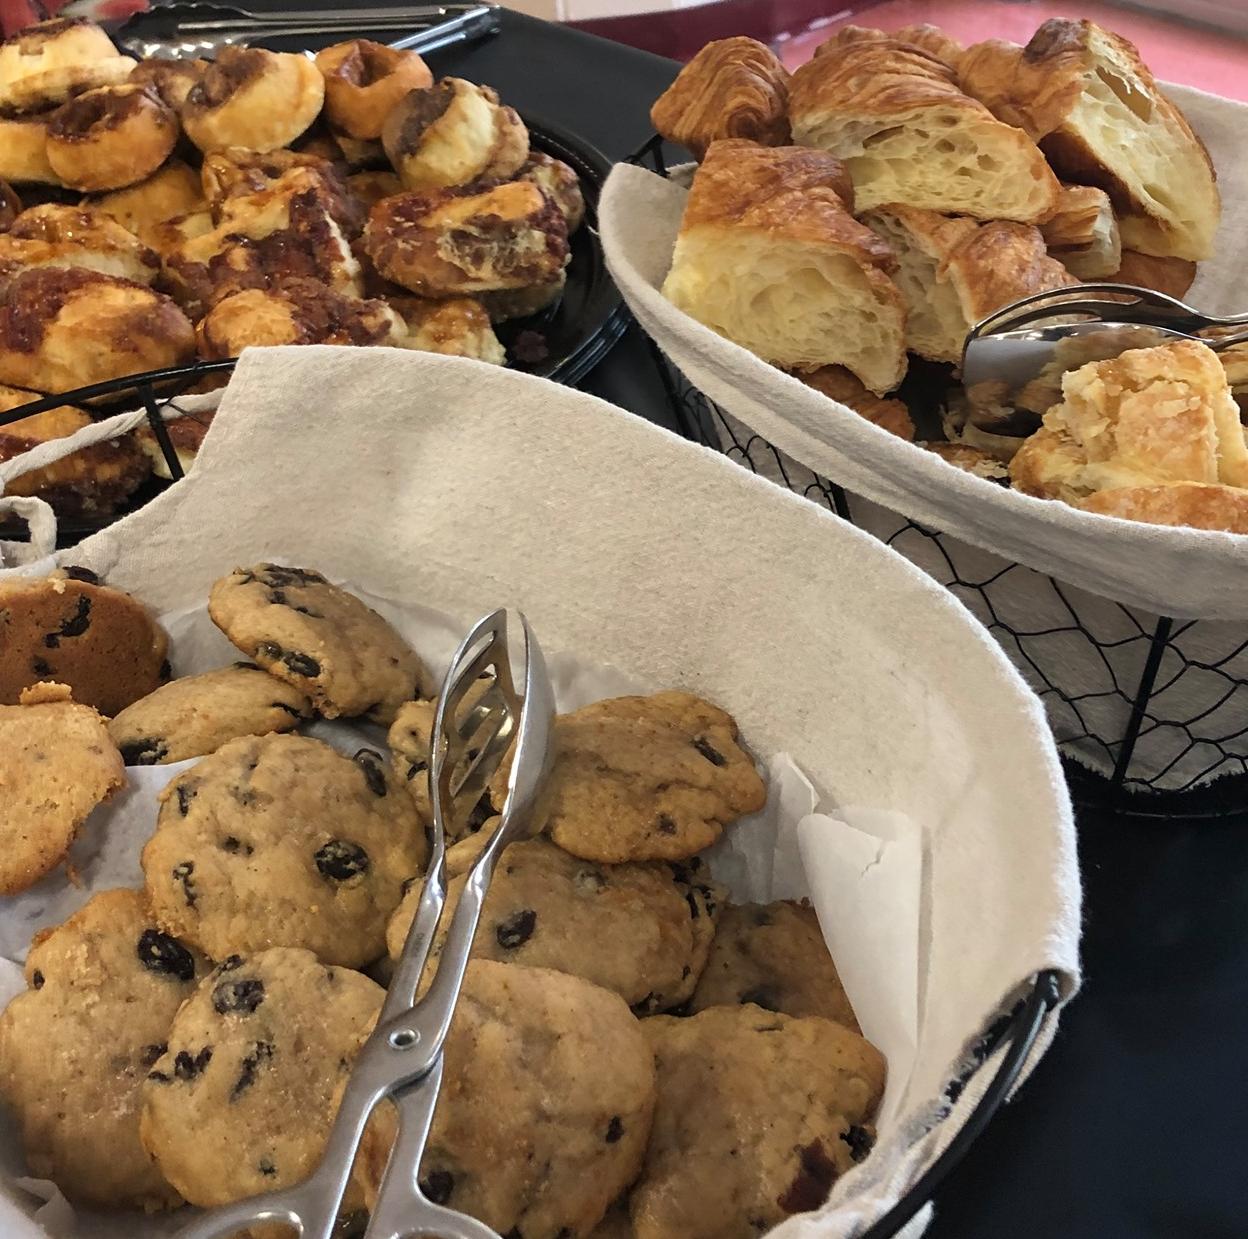 Cookies, cinnamin buns, pastries, and other baked goods served in baskets